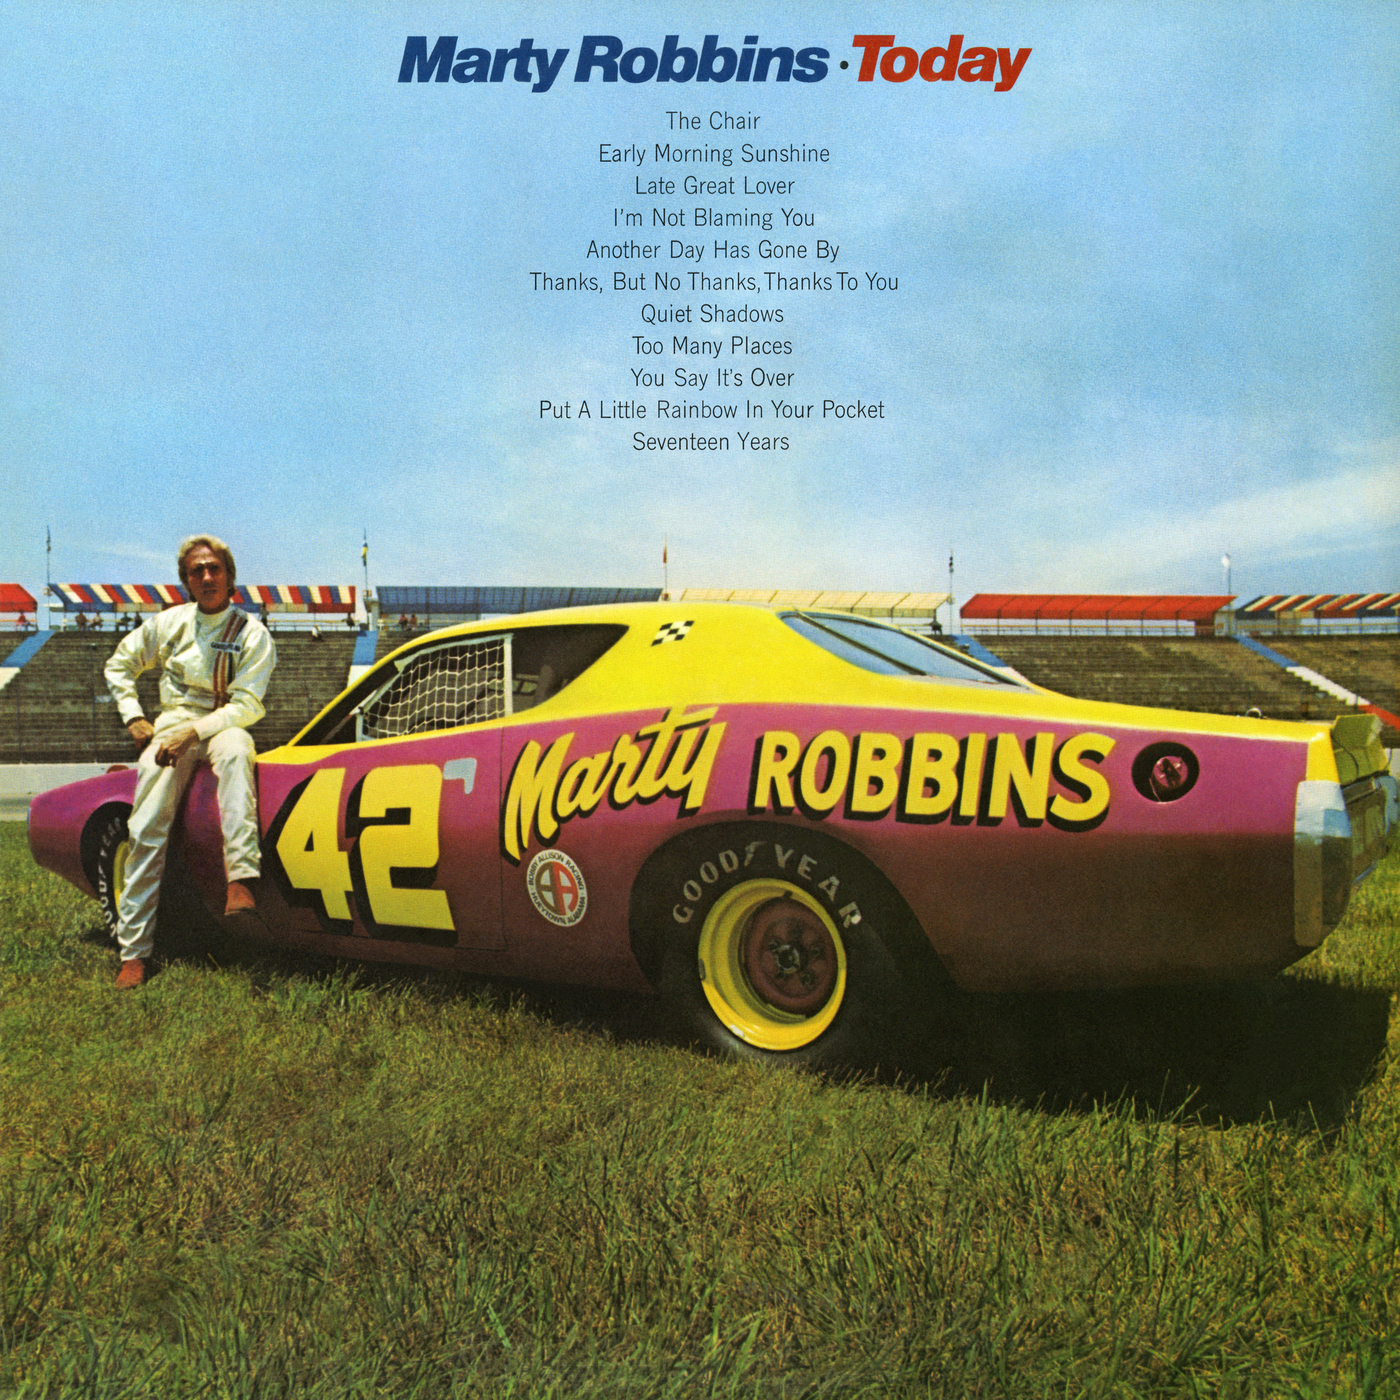 Late Great Lover/Marty Robbins